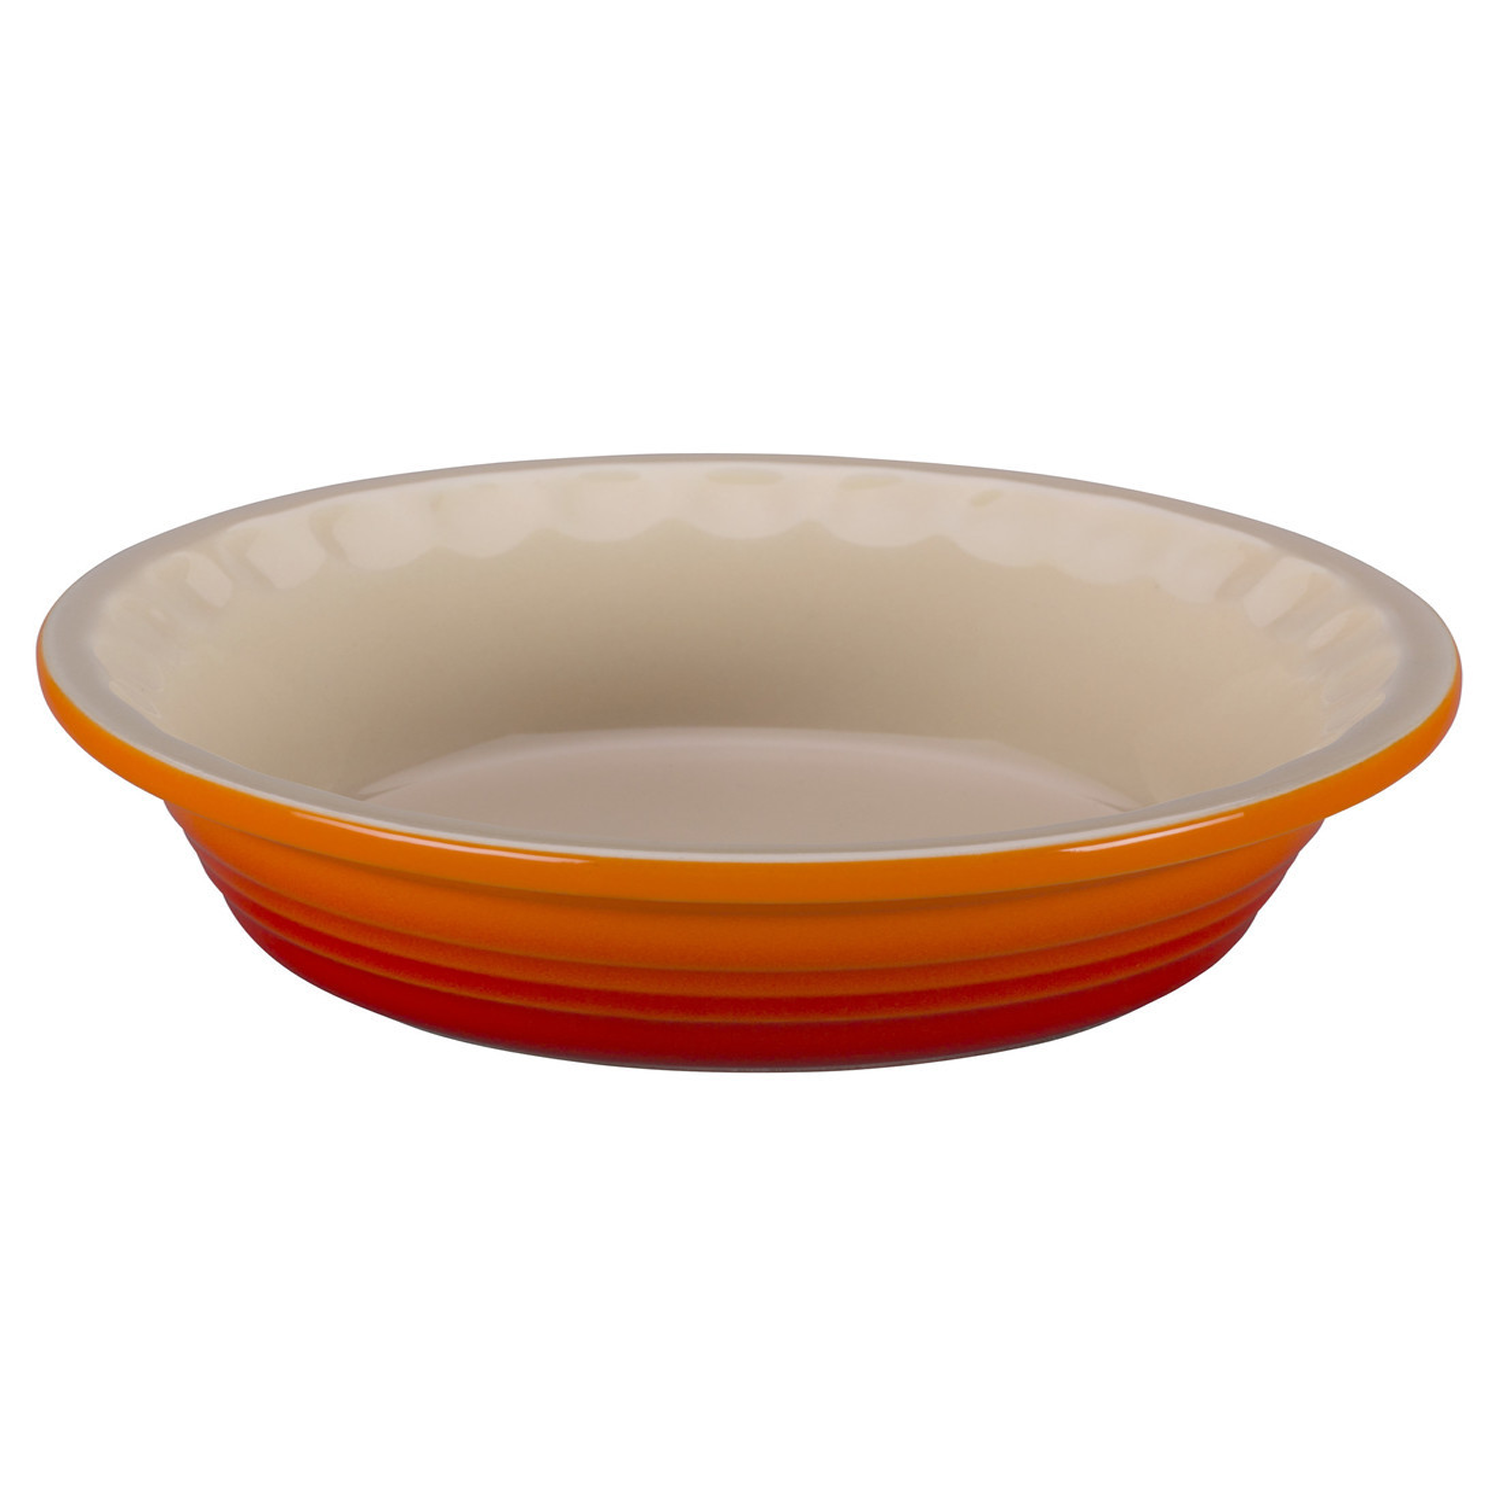 Le Creuset Heritage Covered Rectangle Flame Orange Stoneware Ceramic Baking  Dish with Lid + Reviews